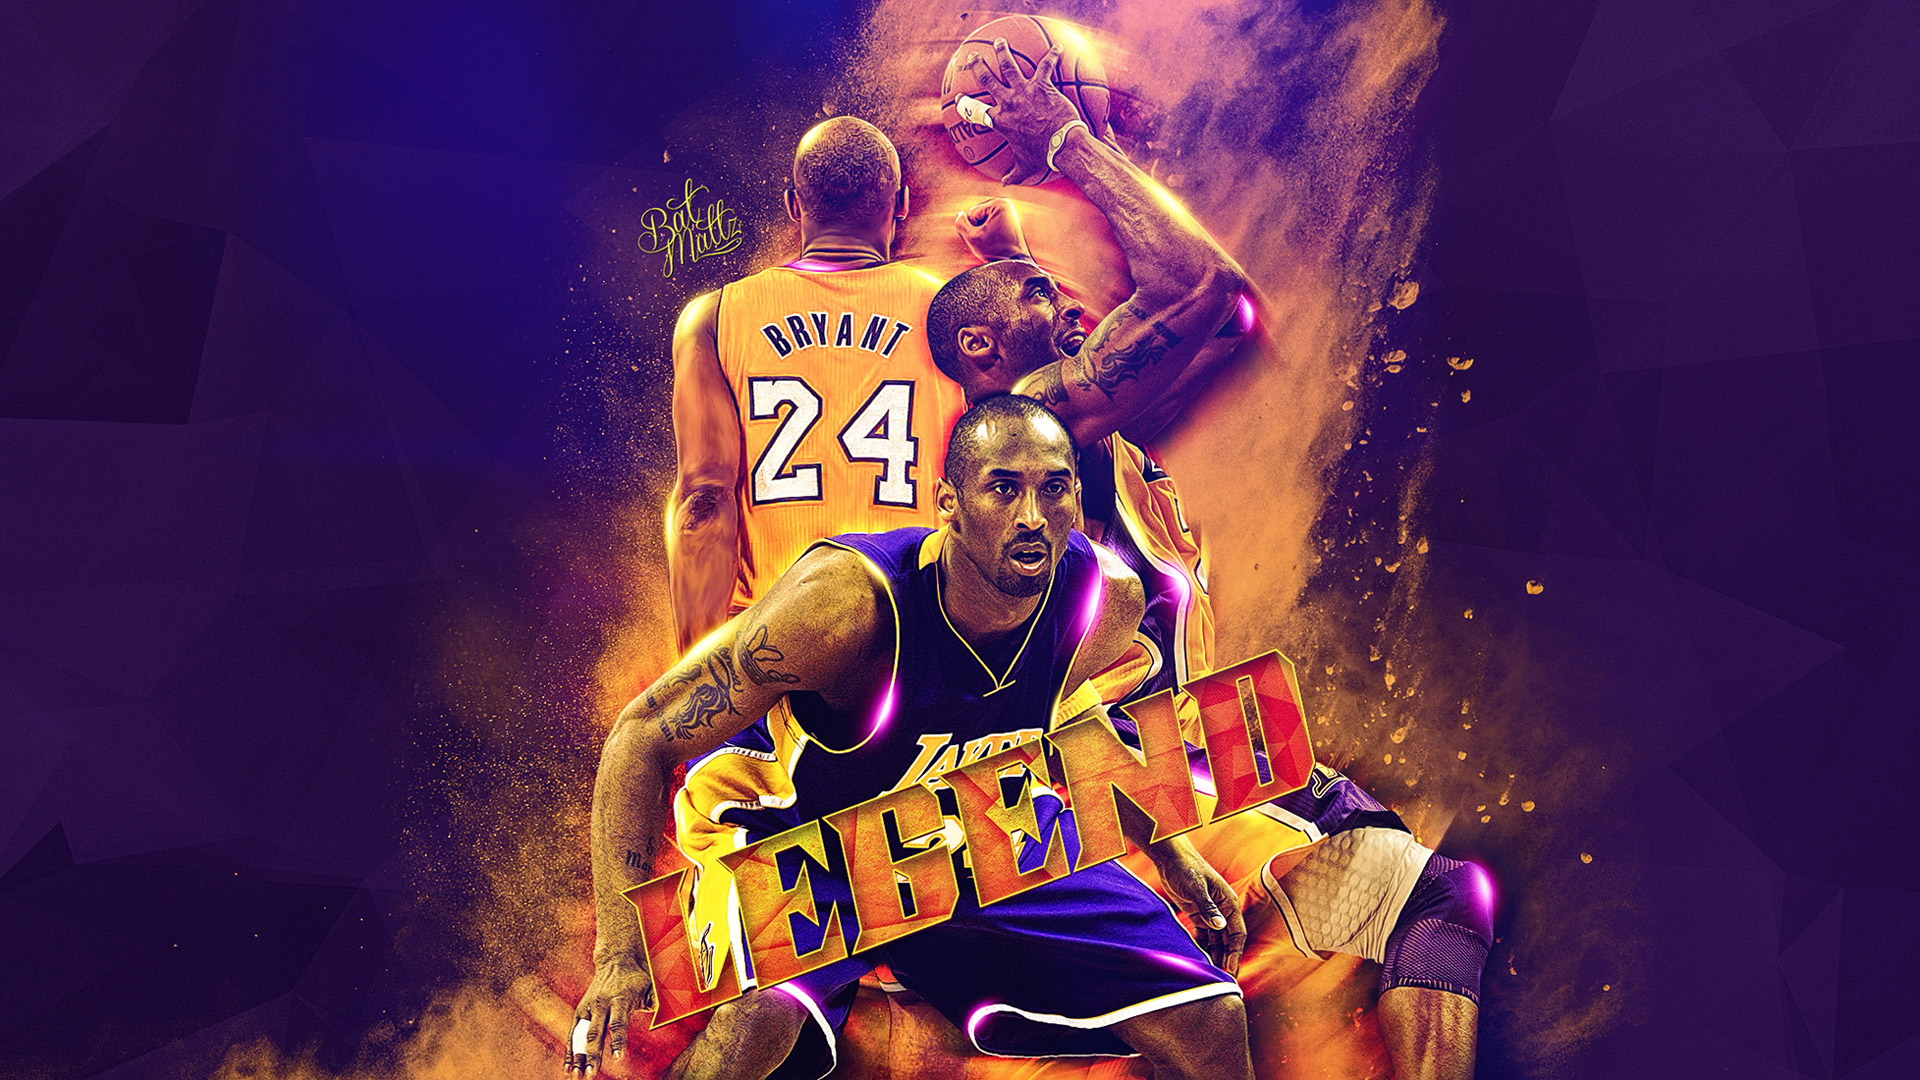 NBA Basketball Kobe Bryant Wallpaper for iPhone 11 Pro Max X 8 7 6   Free Download on 3Wallpapers